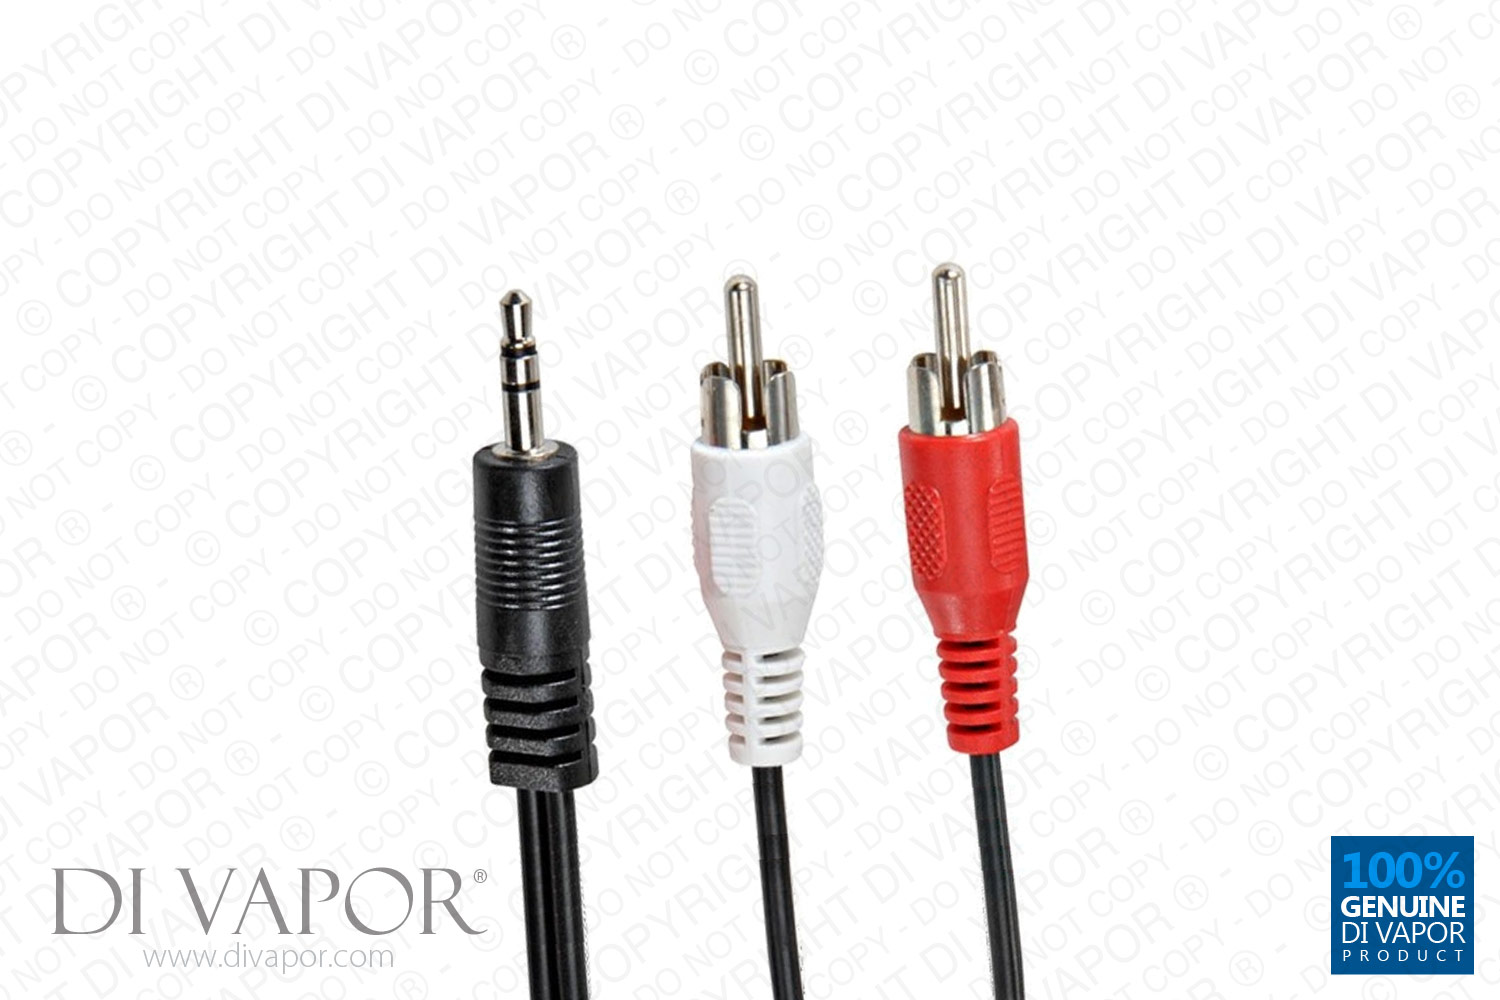 Di Vapor Universal RCA Phono Stereo to 3.5mm Jack connector - Suitable for all Di Vapor steam shower